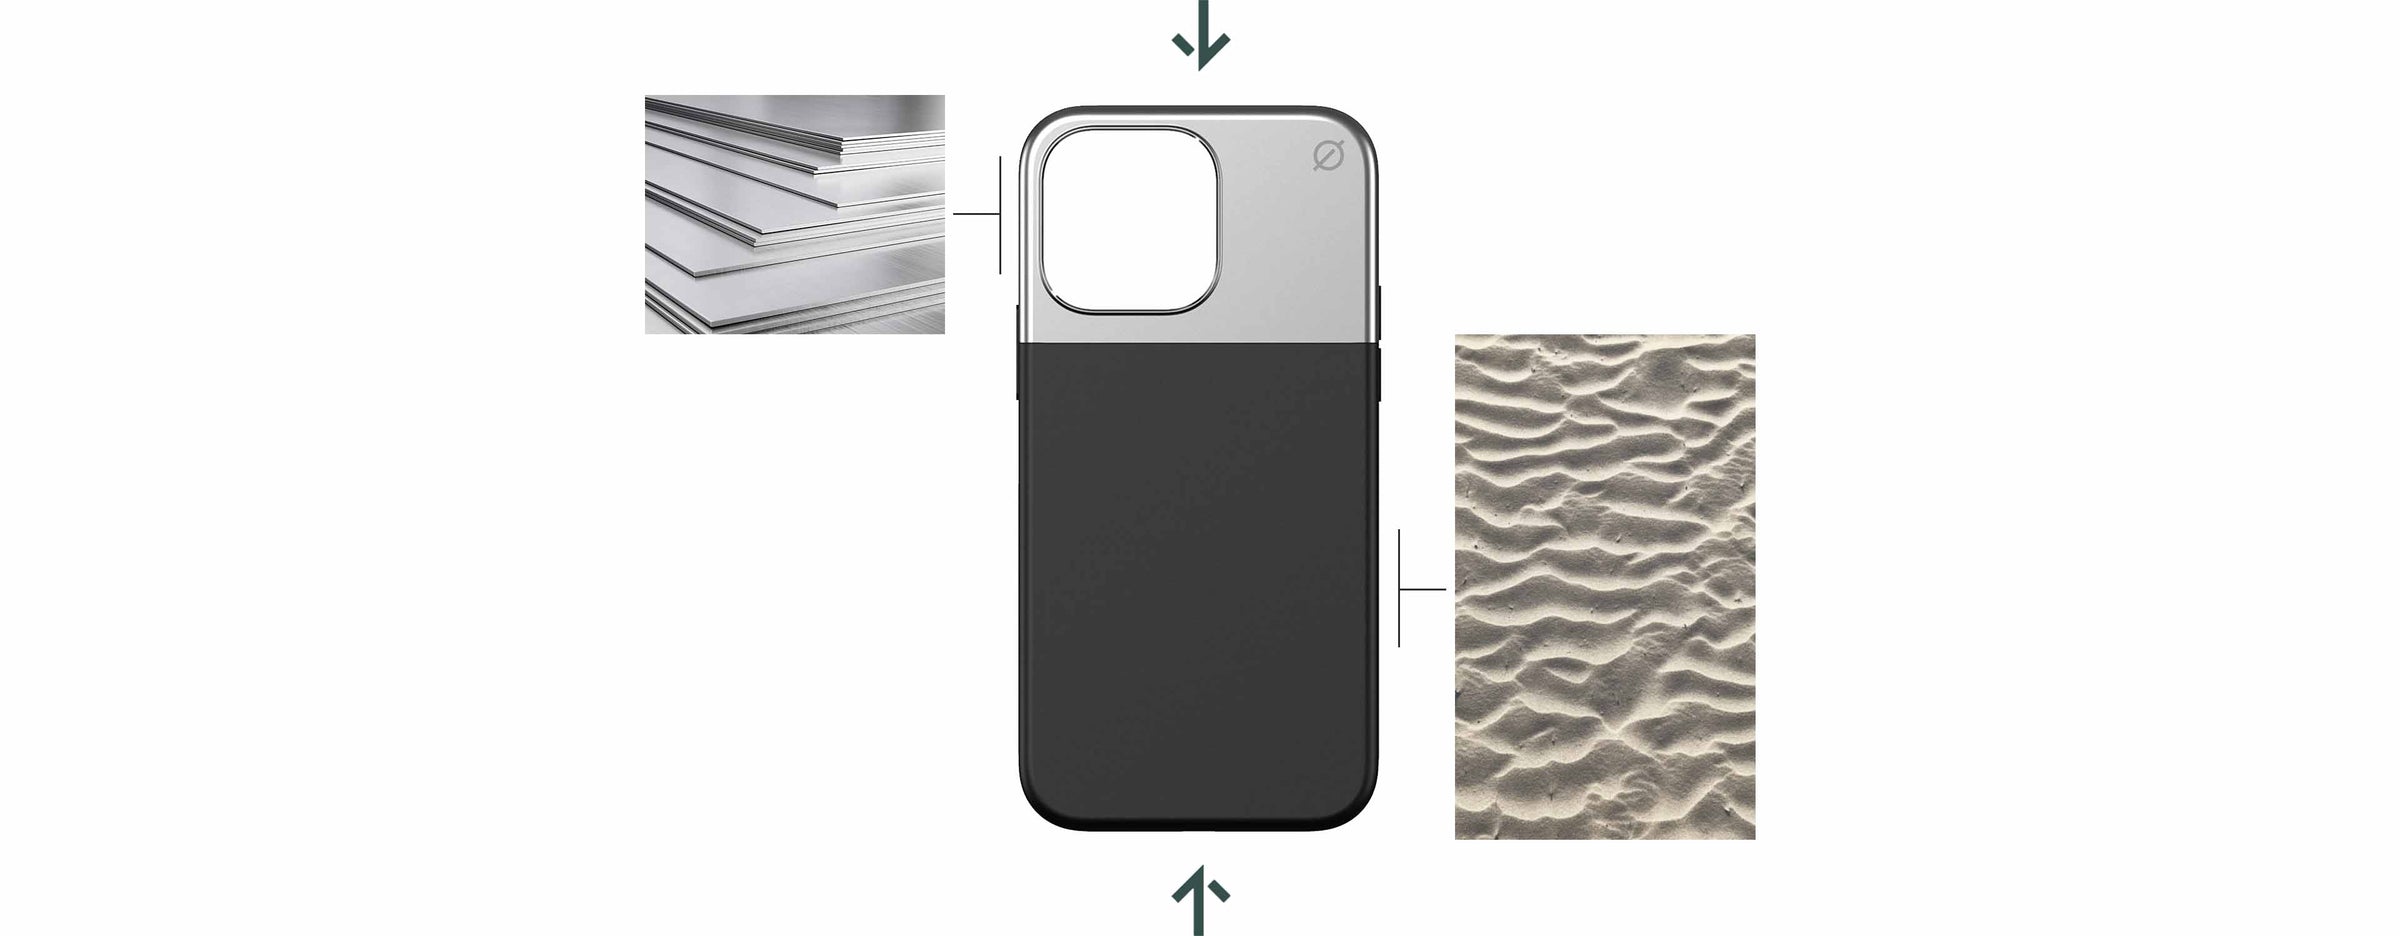 High quality premium materials. strong aluminum, recyclable eco materials. Hard wearing durable long lasting phone case. Protective metal phone case. Soft silicone. Extra grip, silky smooth sand-based silicone sustainable planet friendly eco phone cover 